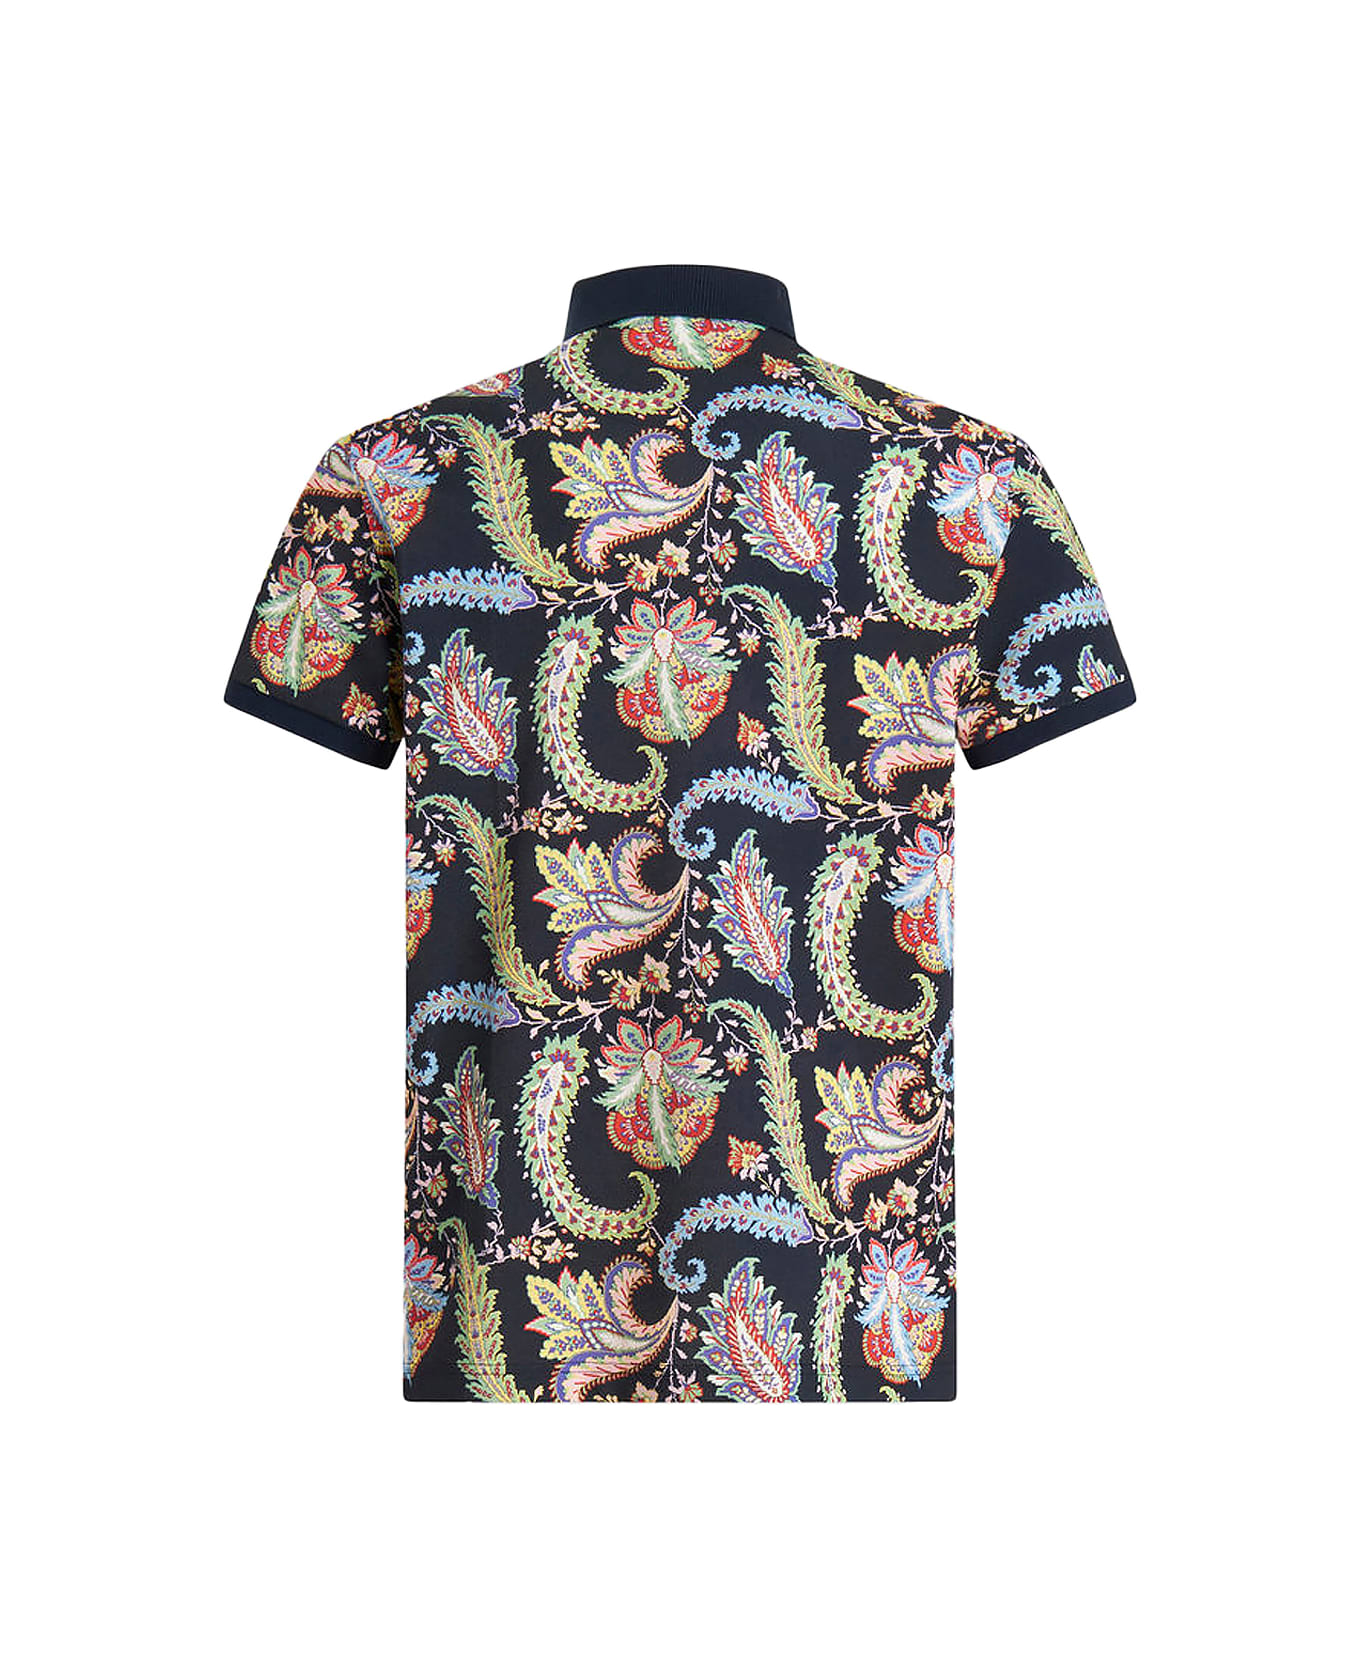 Etro Navy Blue Jacquard Polo Shirt With Floral Paisley Designs - Blu